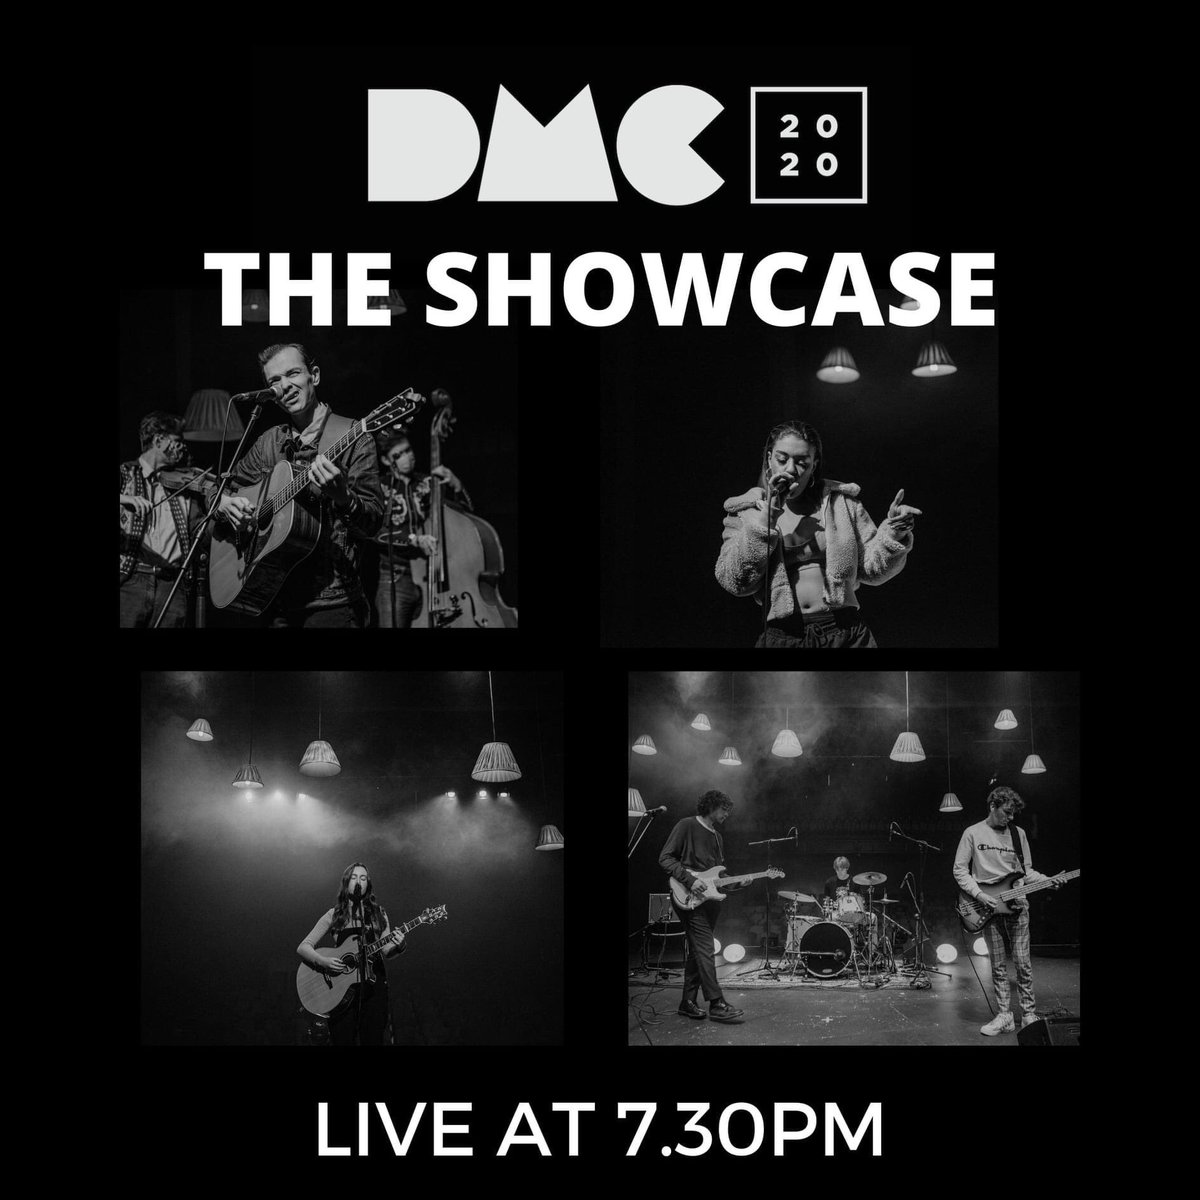 ⚡️ 7.30pm: DMC 2020 Showcase Online featuring sets from @AWKWRDFP, Nova Scotia the Truth, @eliadavidson1 and The Curb. This Showcase will only be available to watch tonight - A ONCE IN A LIFETIME STREAM! So make sure you tune in at 7.30pm on the dot here > bit.ly/2H8B1Kn